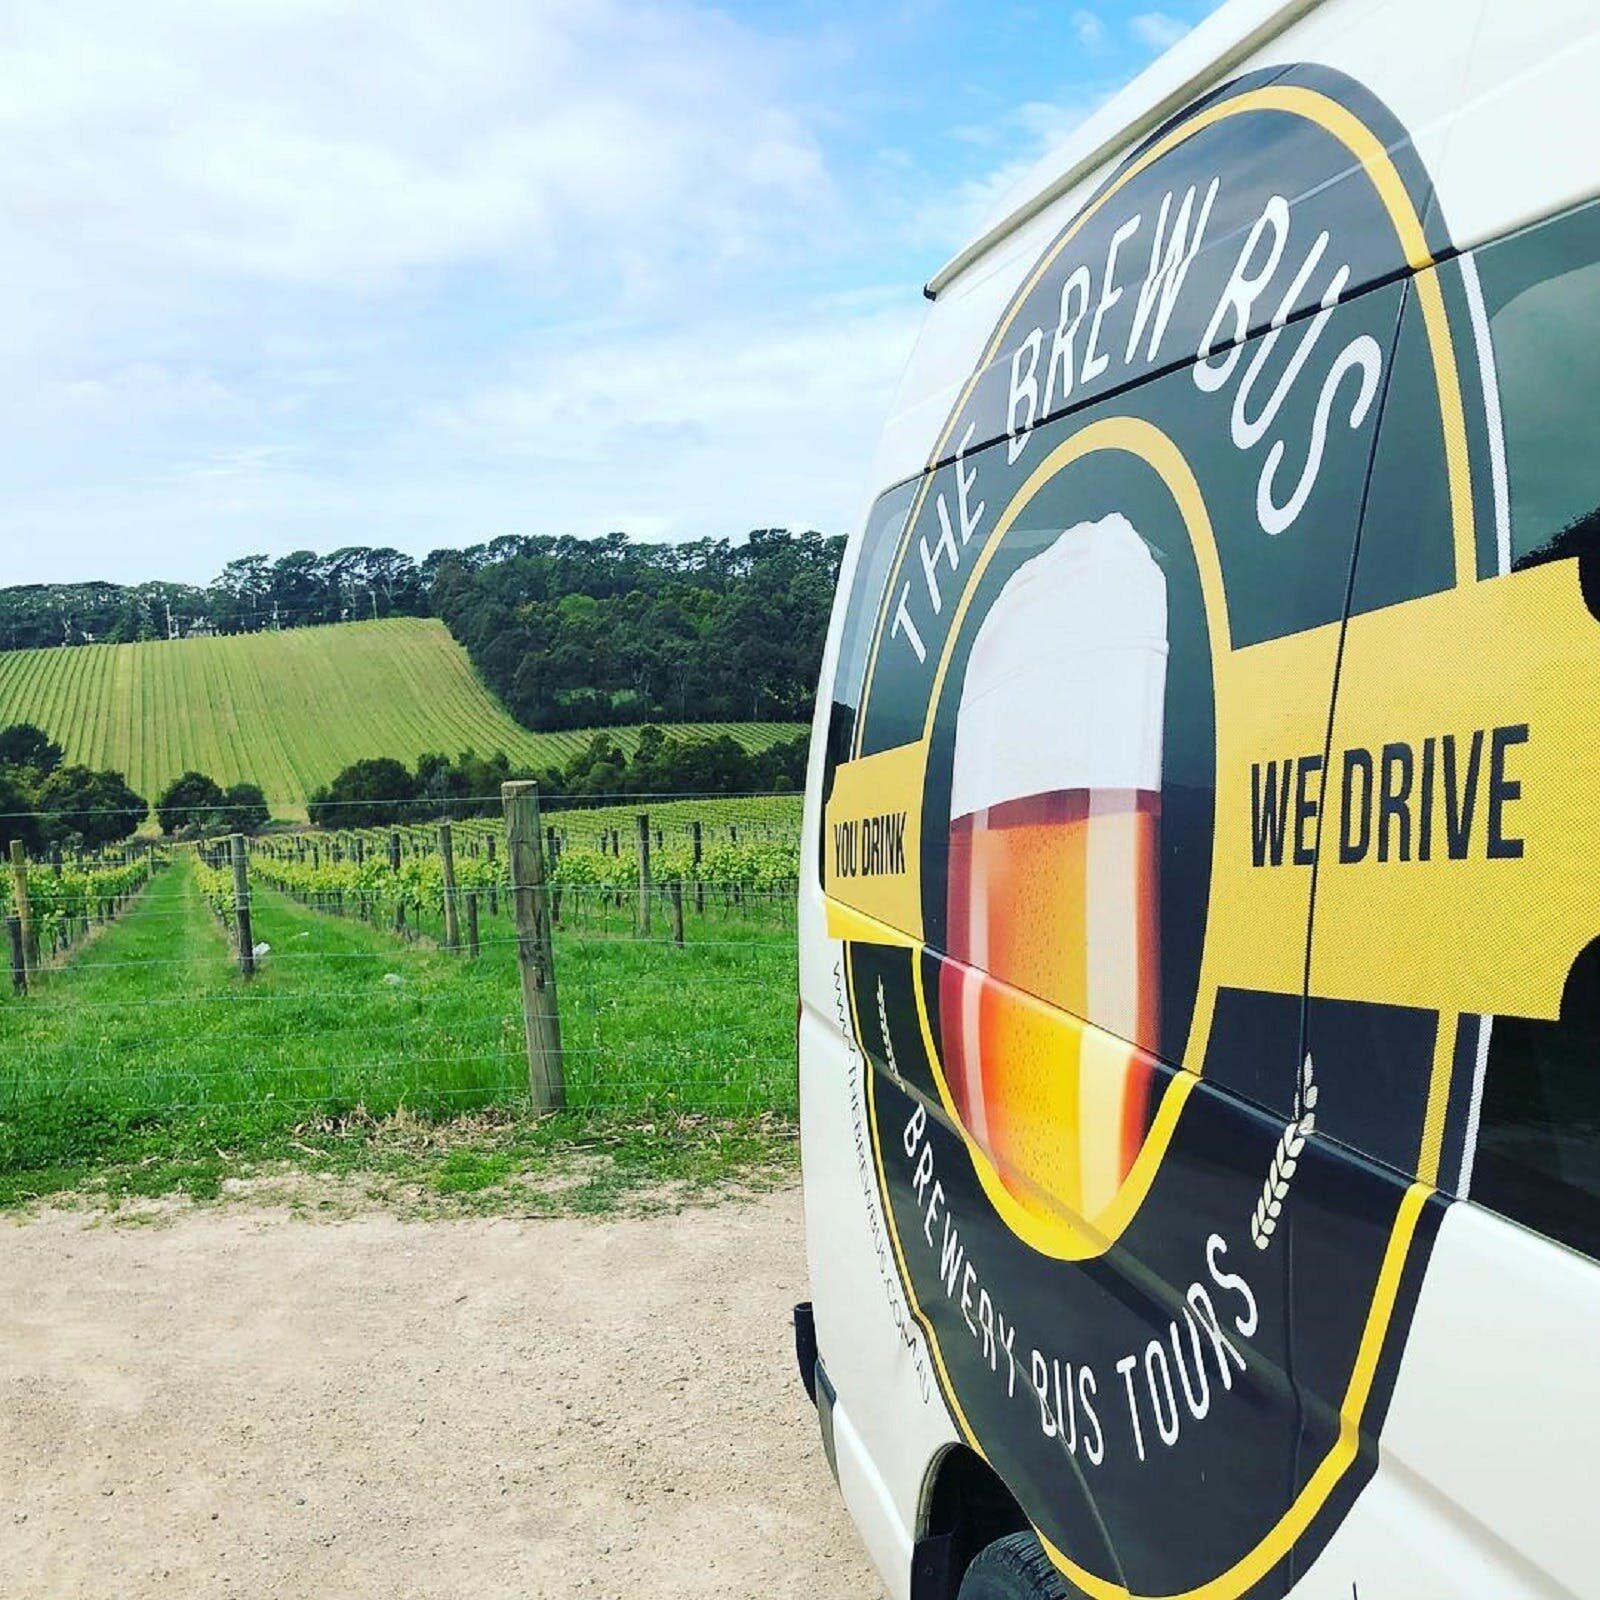 The Brewery Bus tour van in front of rolling vineyards